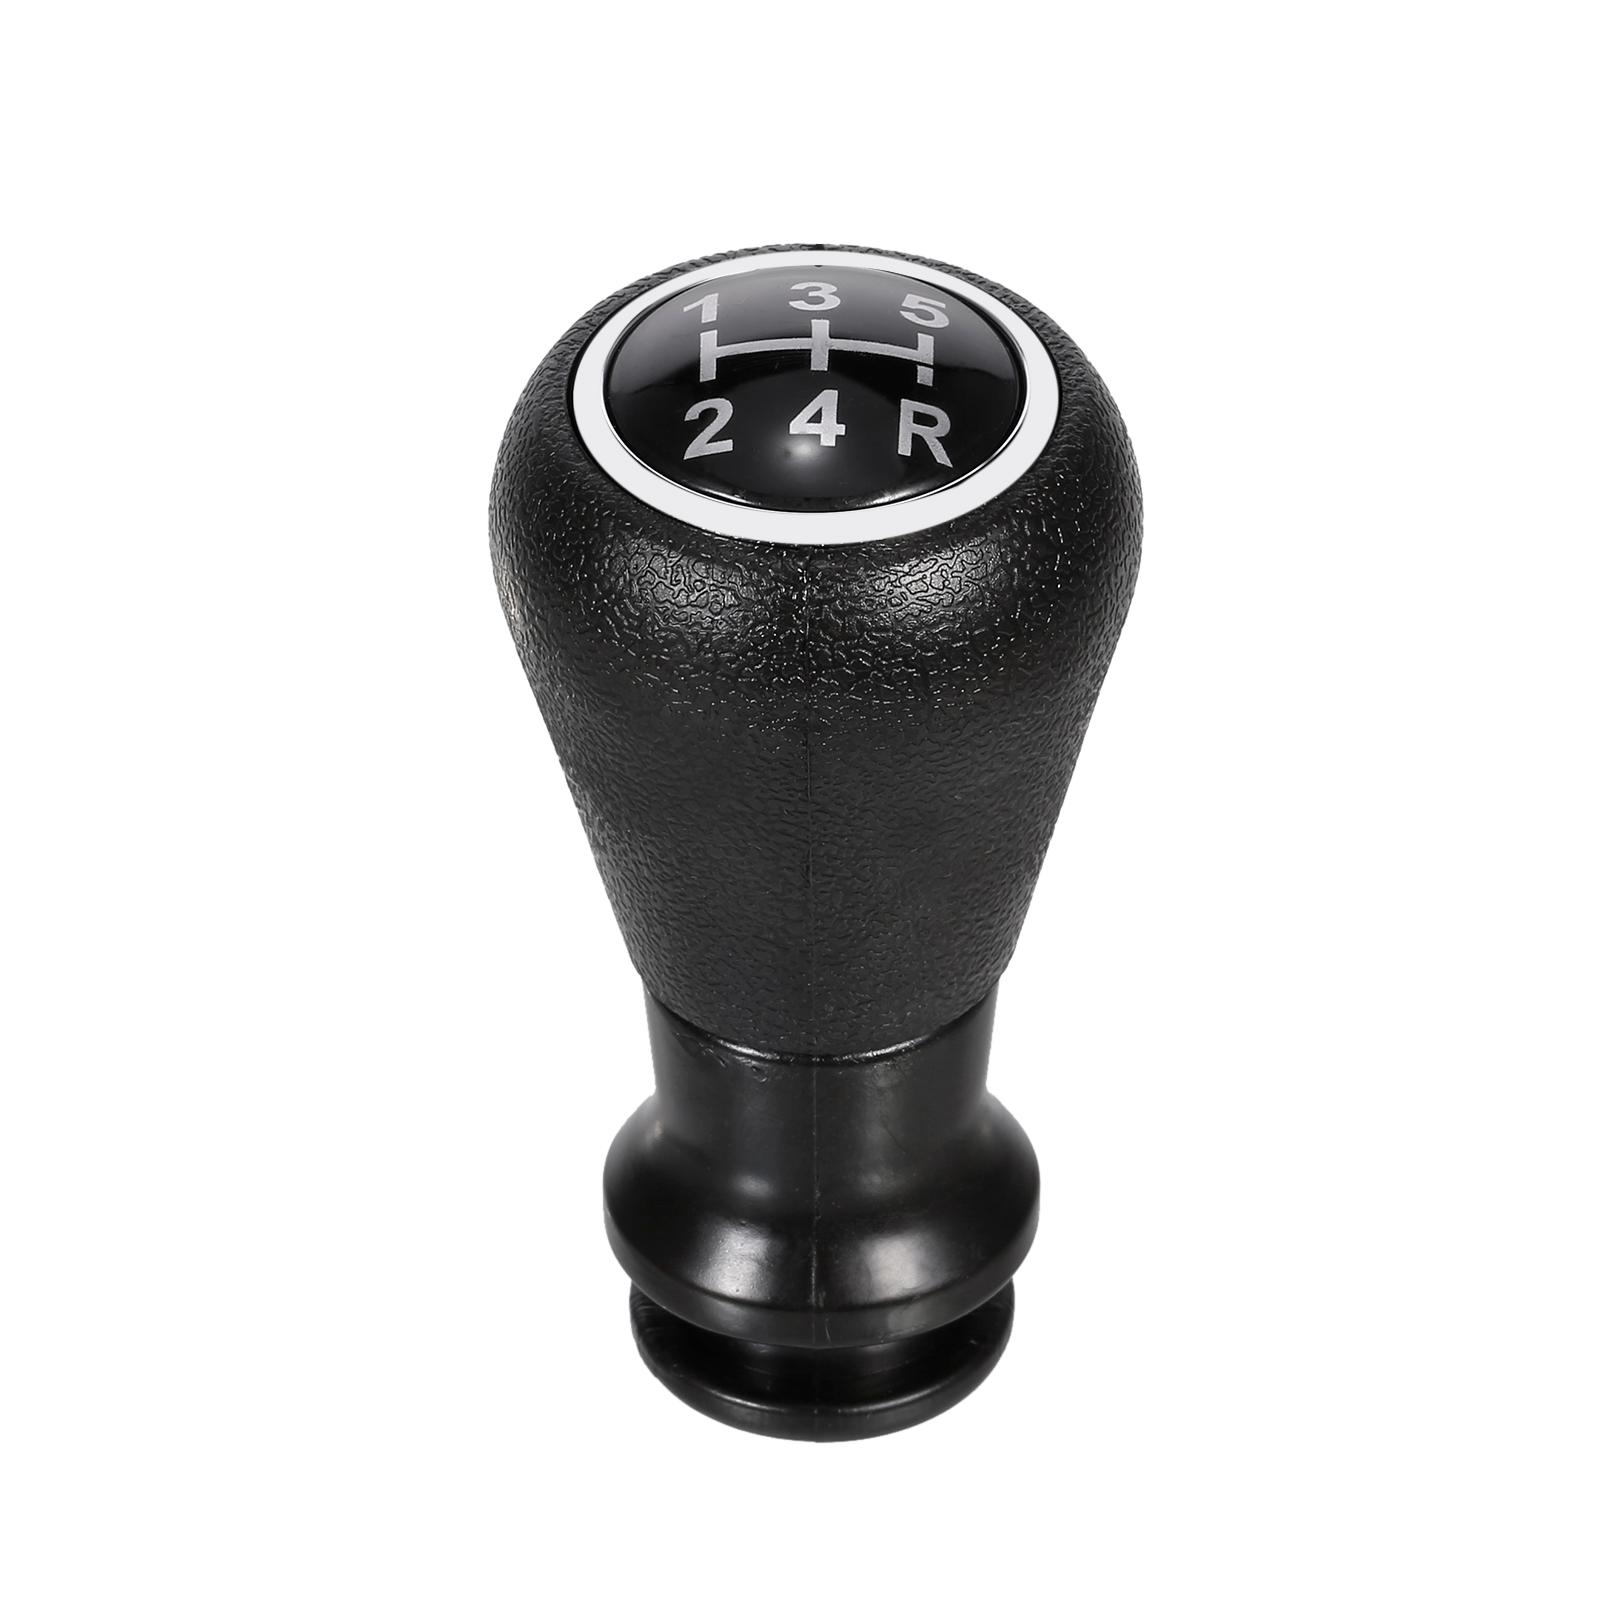 5 Speed Gear Shift Knob Head Replacement for PEUGEOT 106 206 306 406 207 307 407 408 508 605 607 807